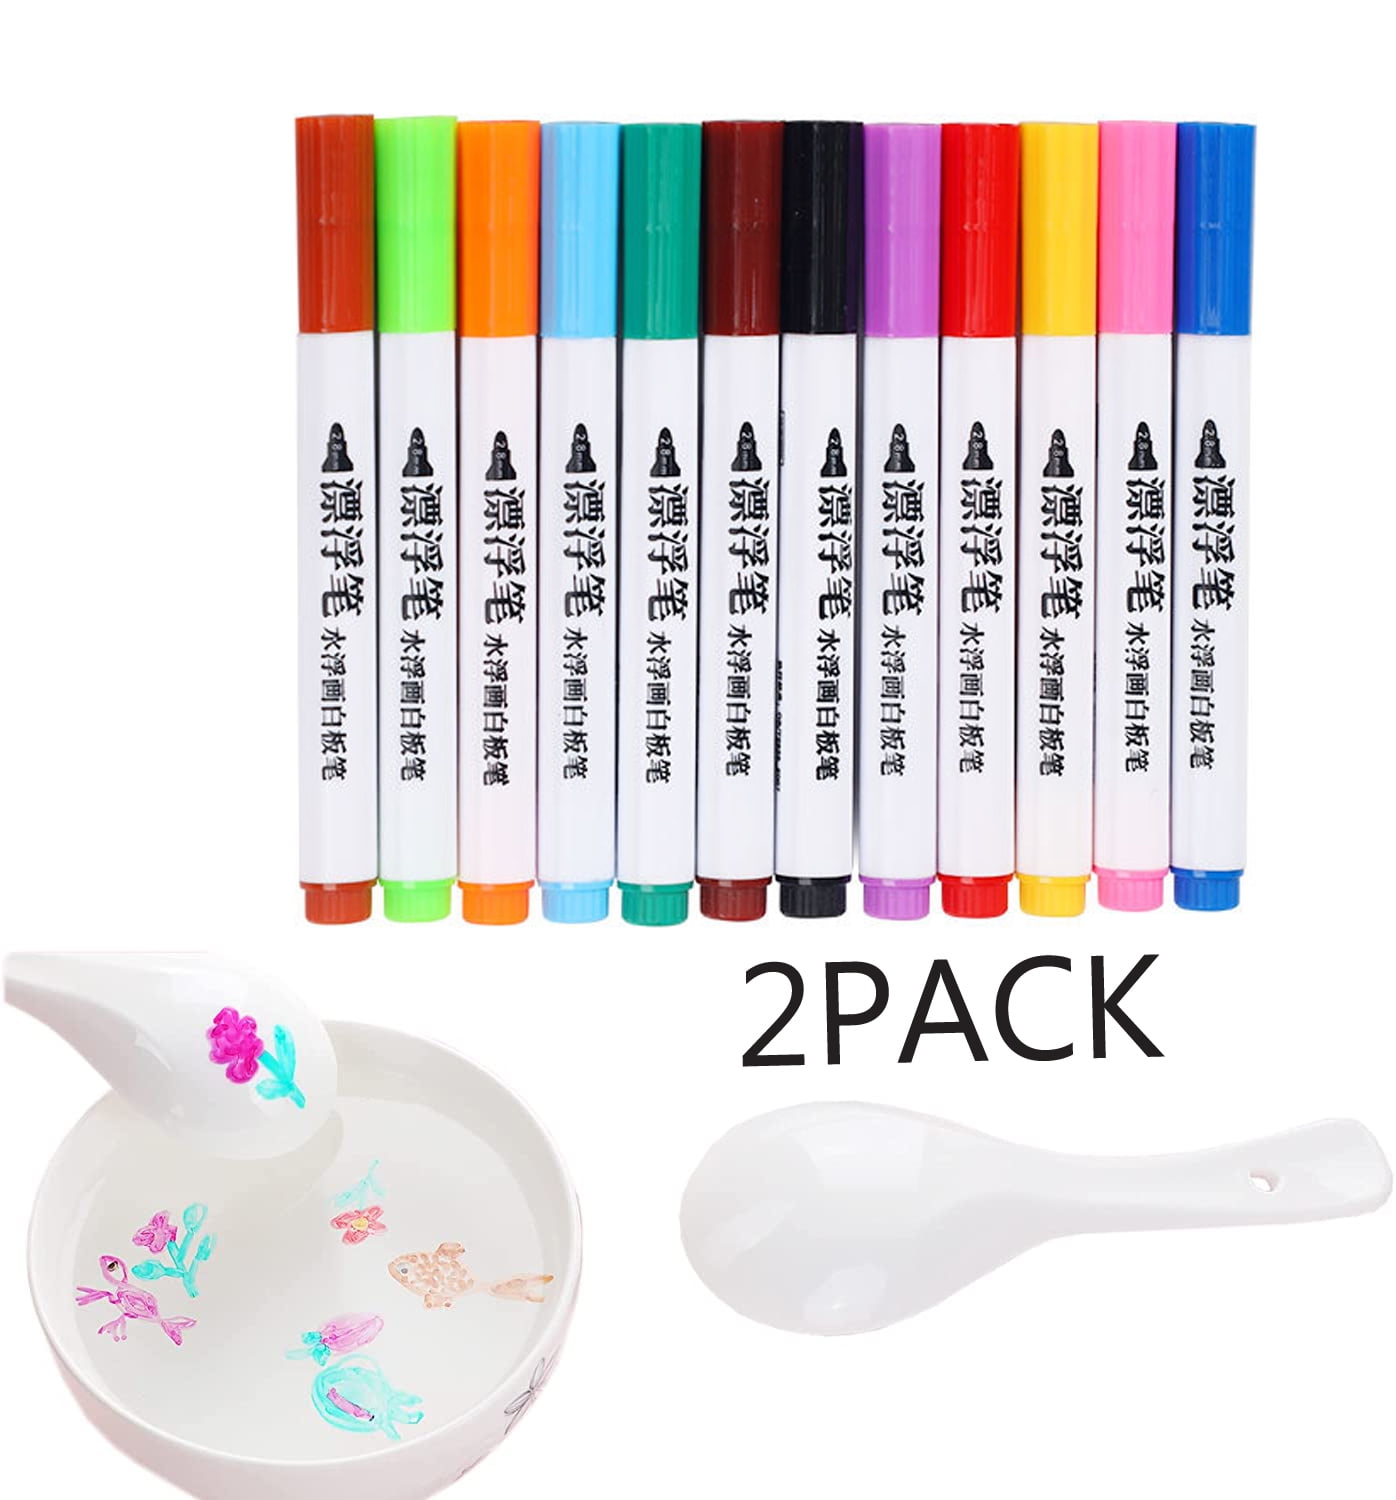 Water Painting Set For Kids, Magical Floating Ink Pen, Dry Erase Whiteboard  Marker, Includes 12 Drawing Pens 1 Ceramic Spoon - Jxlgv